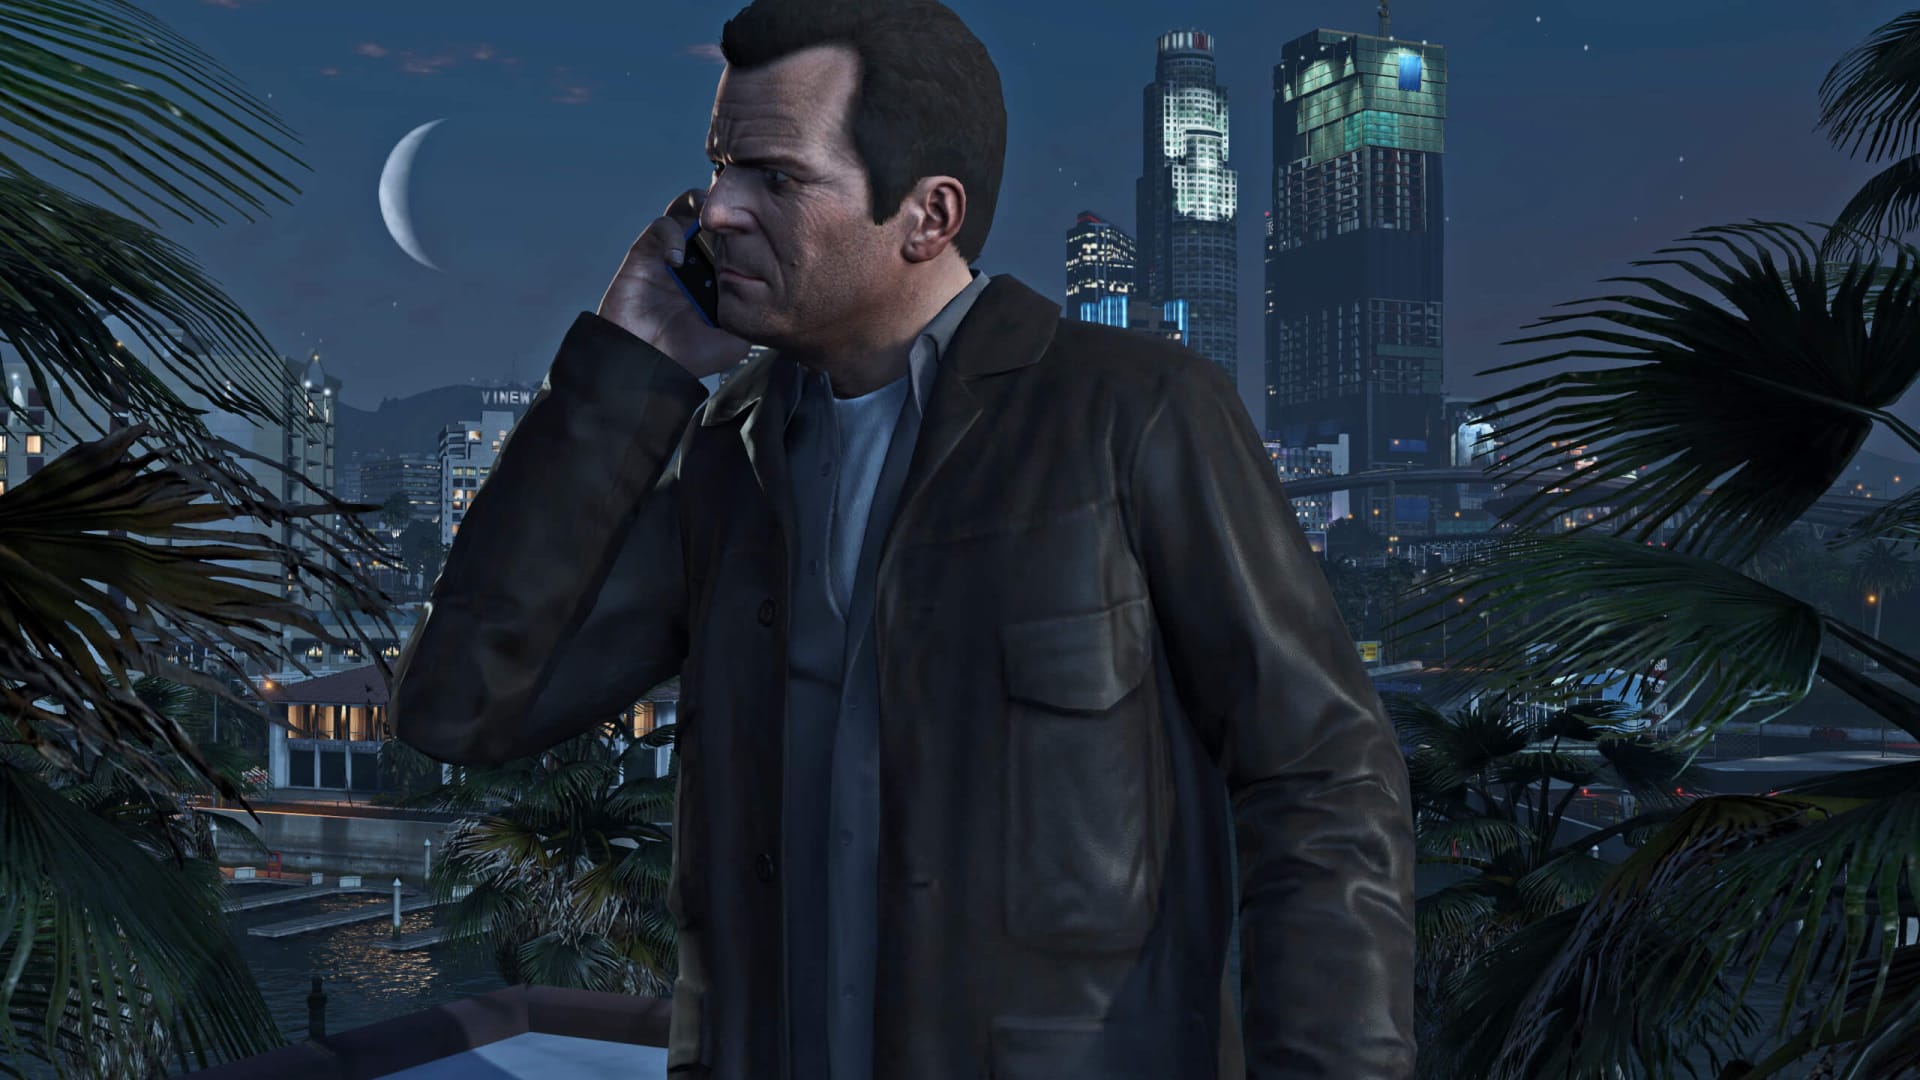 Michael on his phone in Grand Theft Auto 5, a game published by Take-Two Interactive subsidiary Rockstar Games